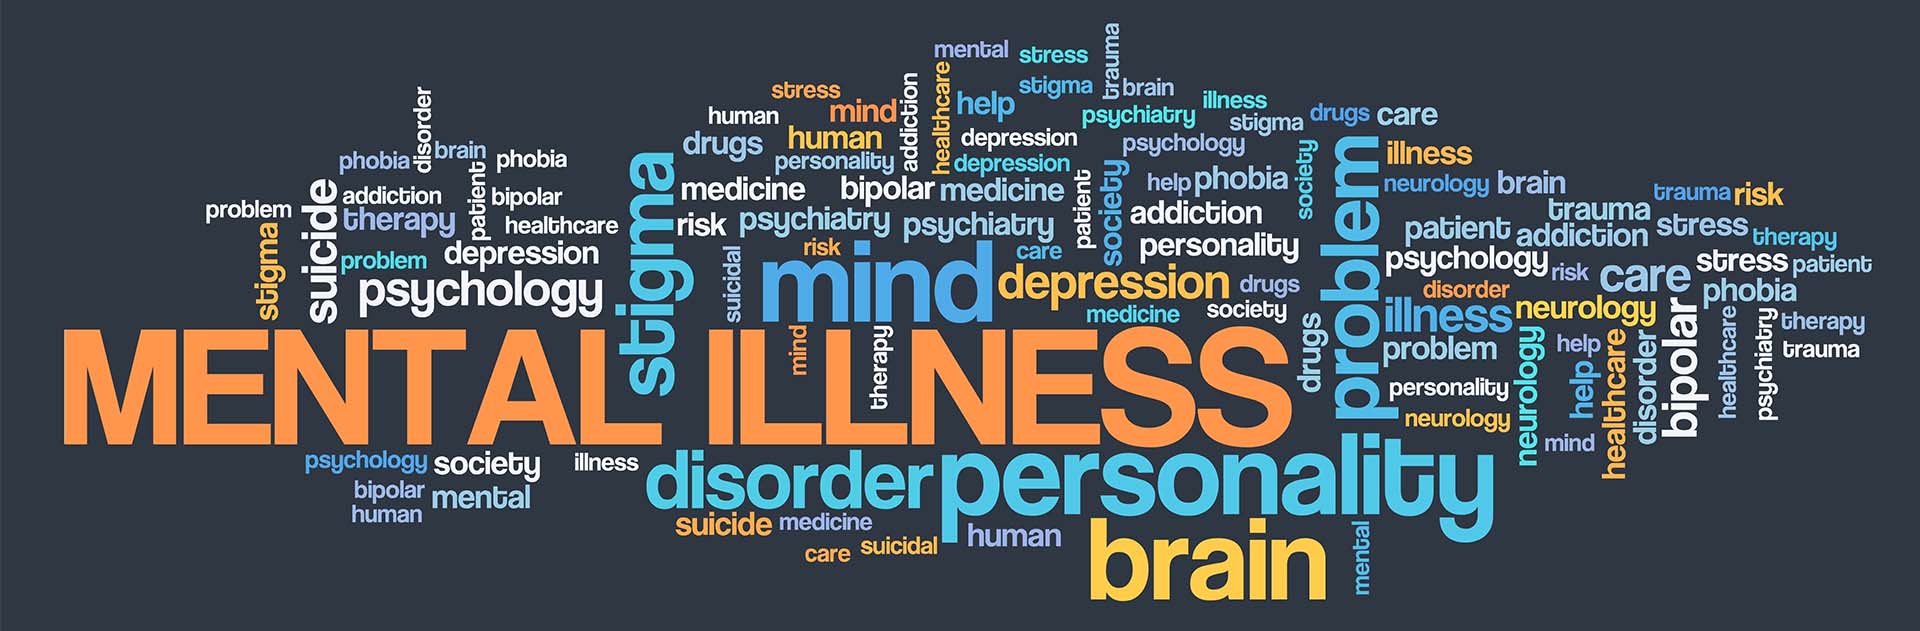 Types of Serious Mental Illness and Their Symptoms